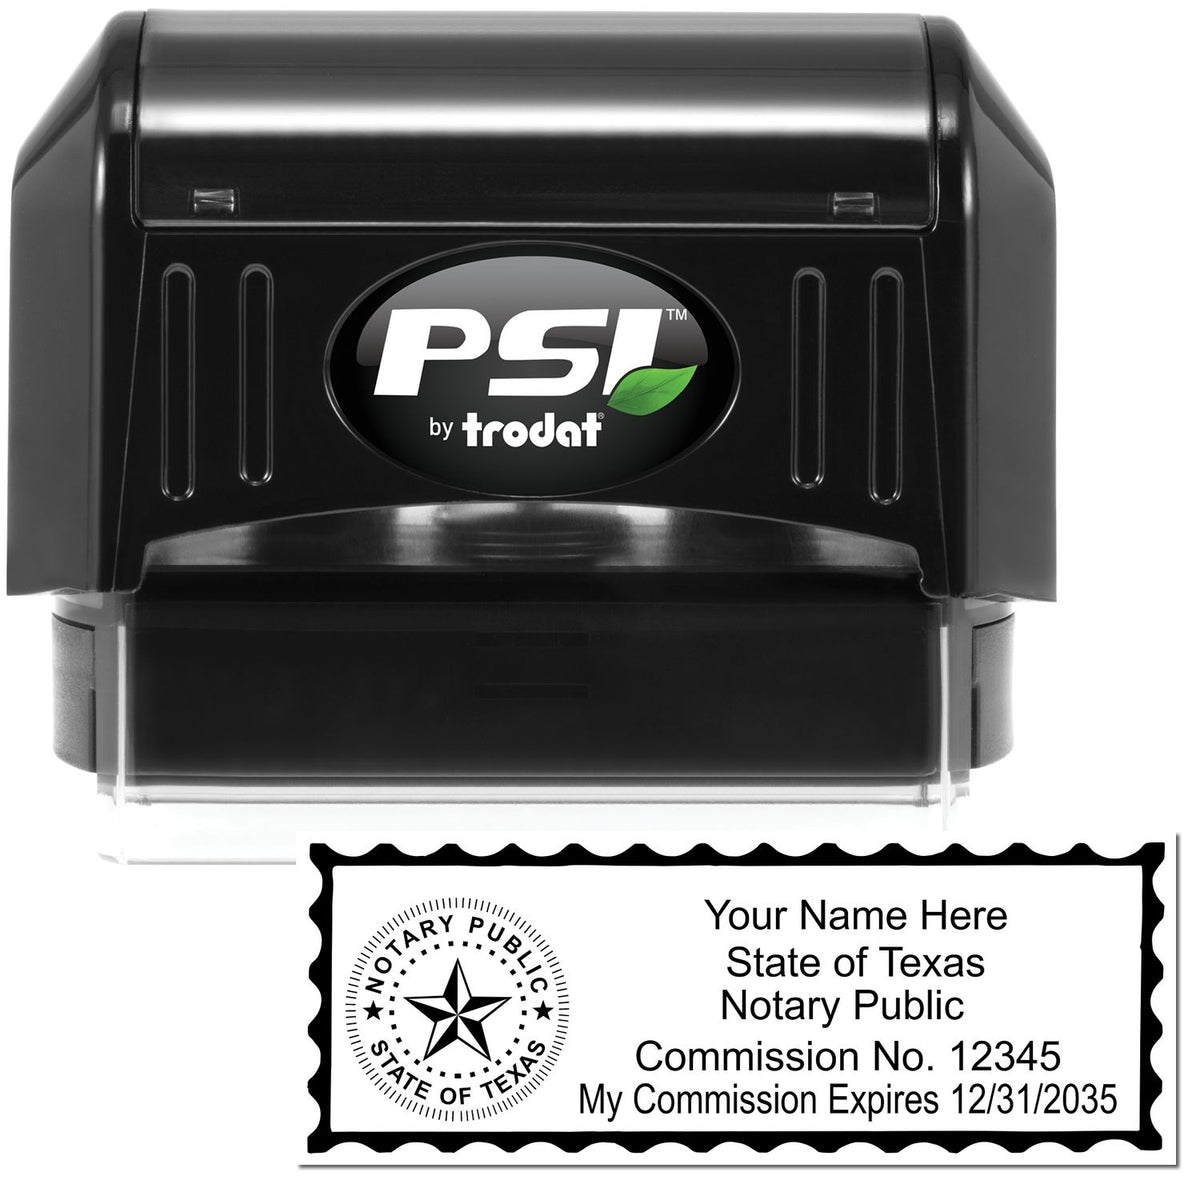 The main image for the PSI Texas Notary Stamp depicting a sample of the imprint and electronic files